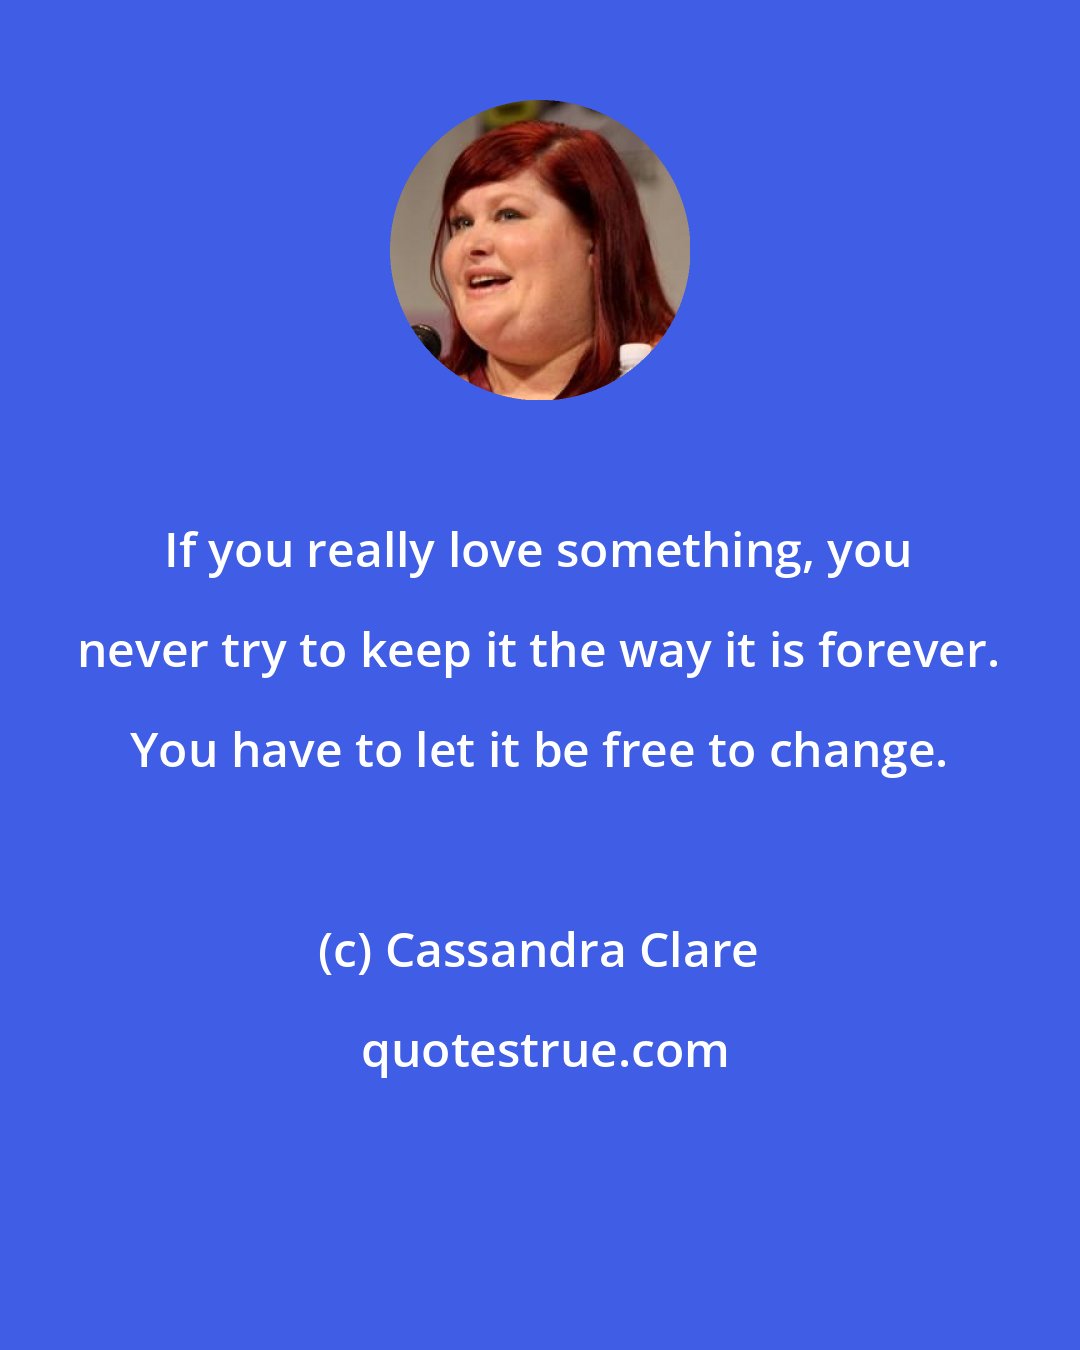 Cassandra Clare: If you really love something, you never try to keep it the way it is forever. You have to let it be free to change.